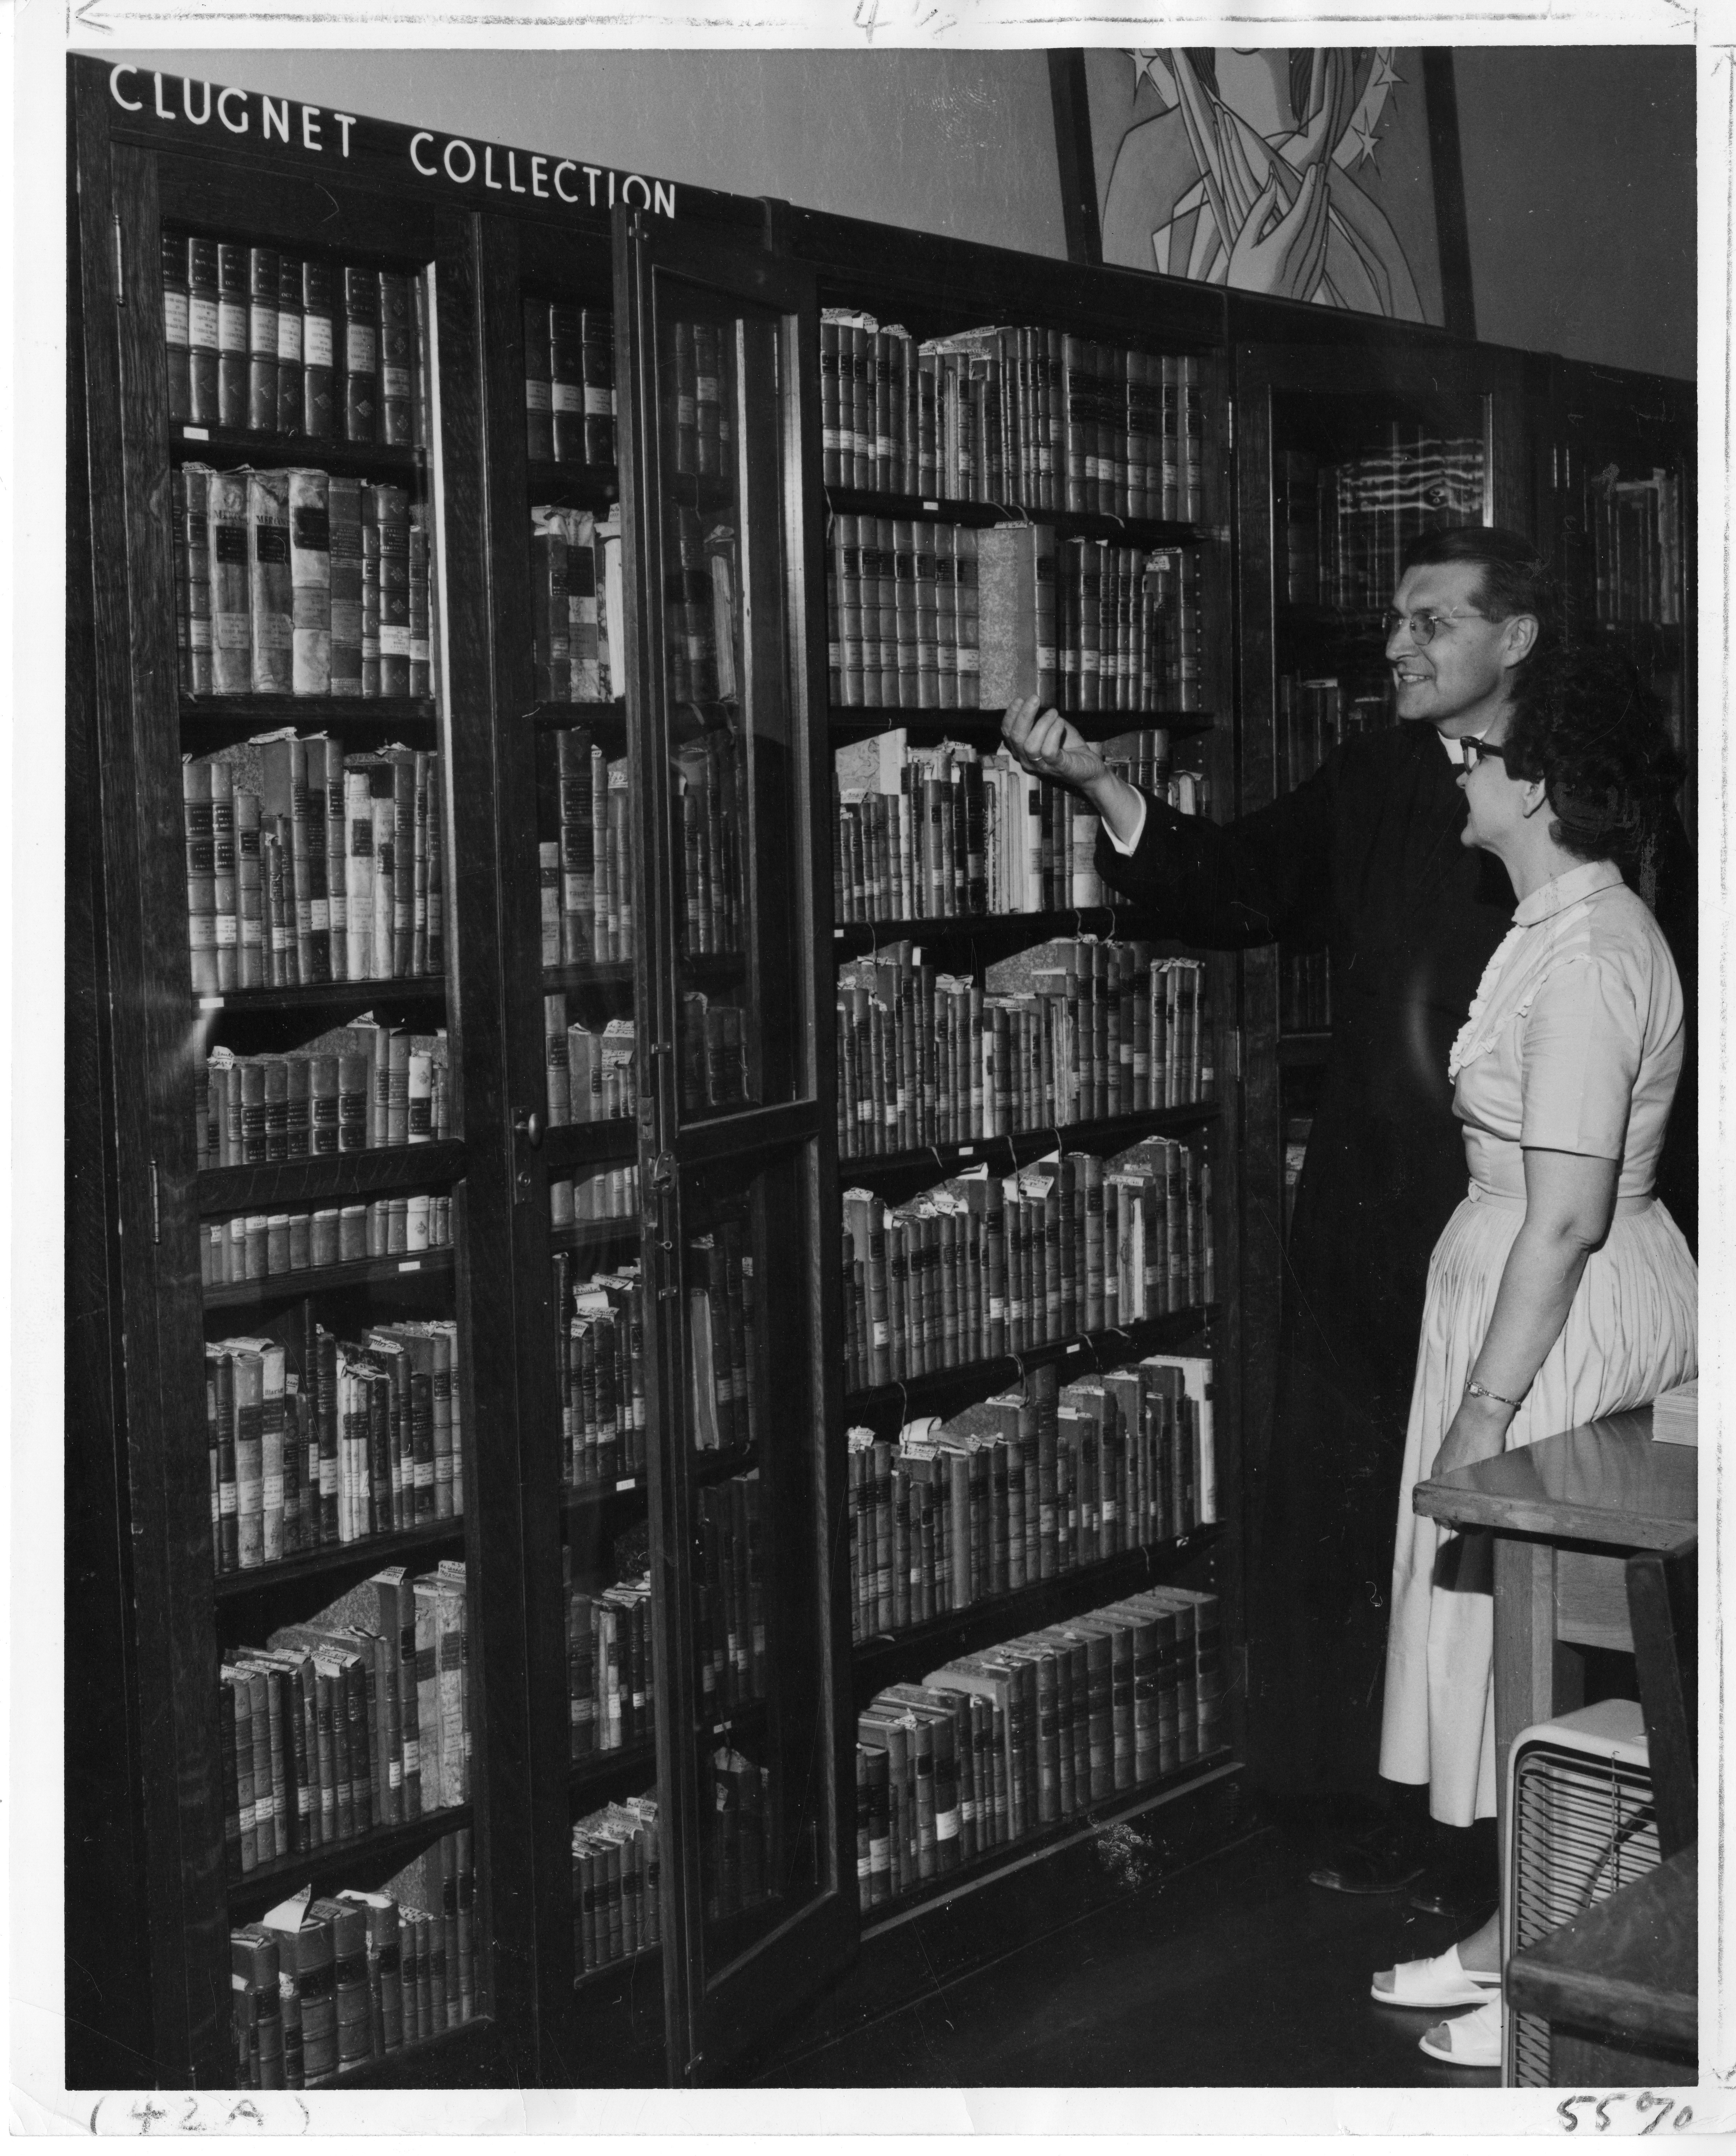 Fr. Philip C. Hoelle, S.M., director of the Marian Library, showing the Clugnet Collection to librarian Daisy Mullins, circa 1960.